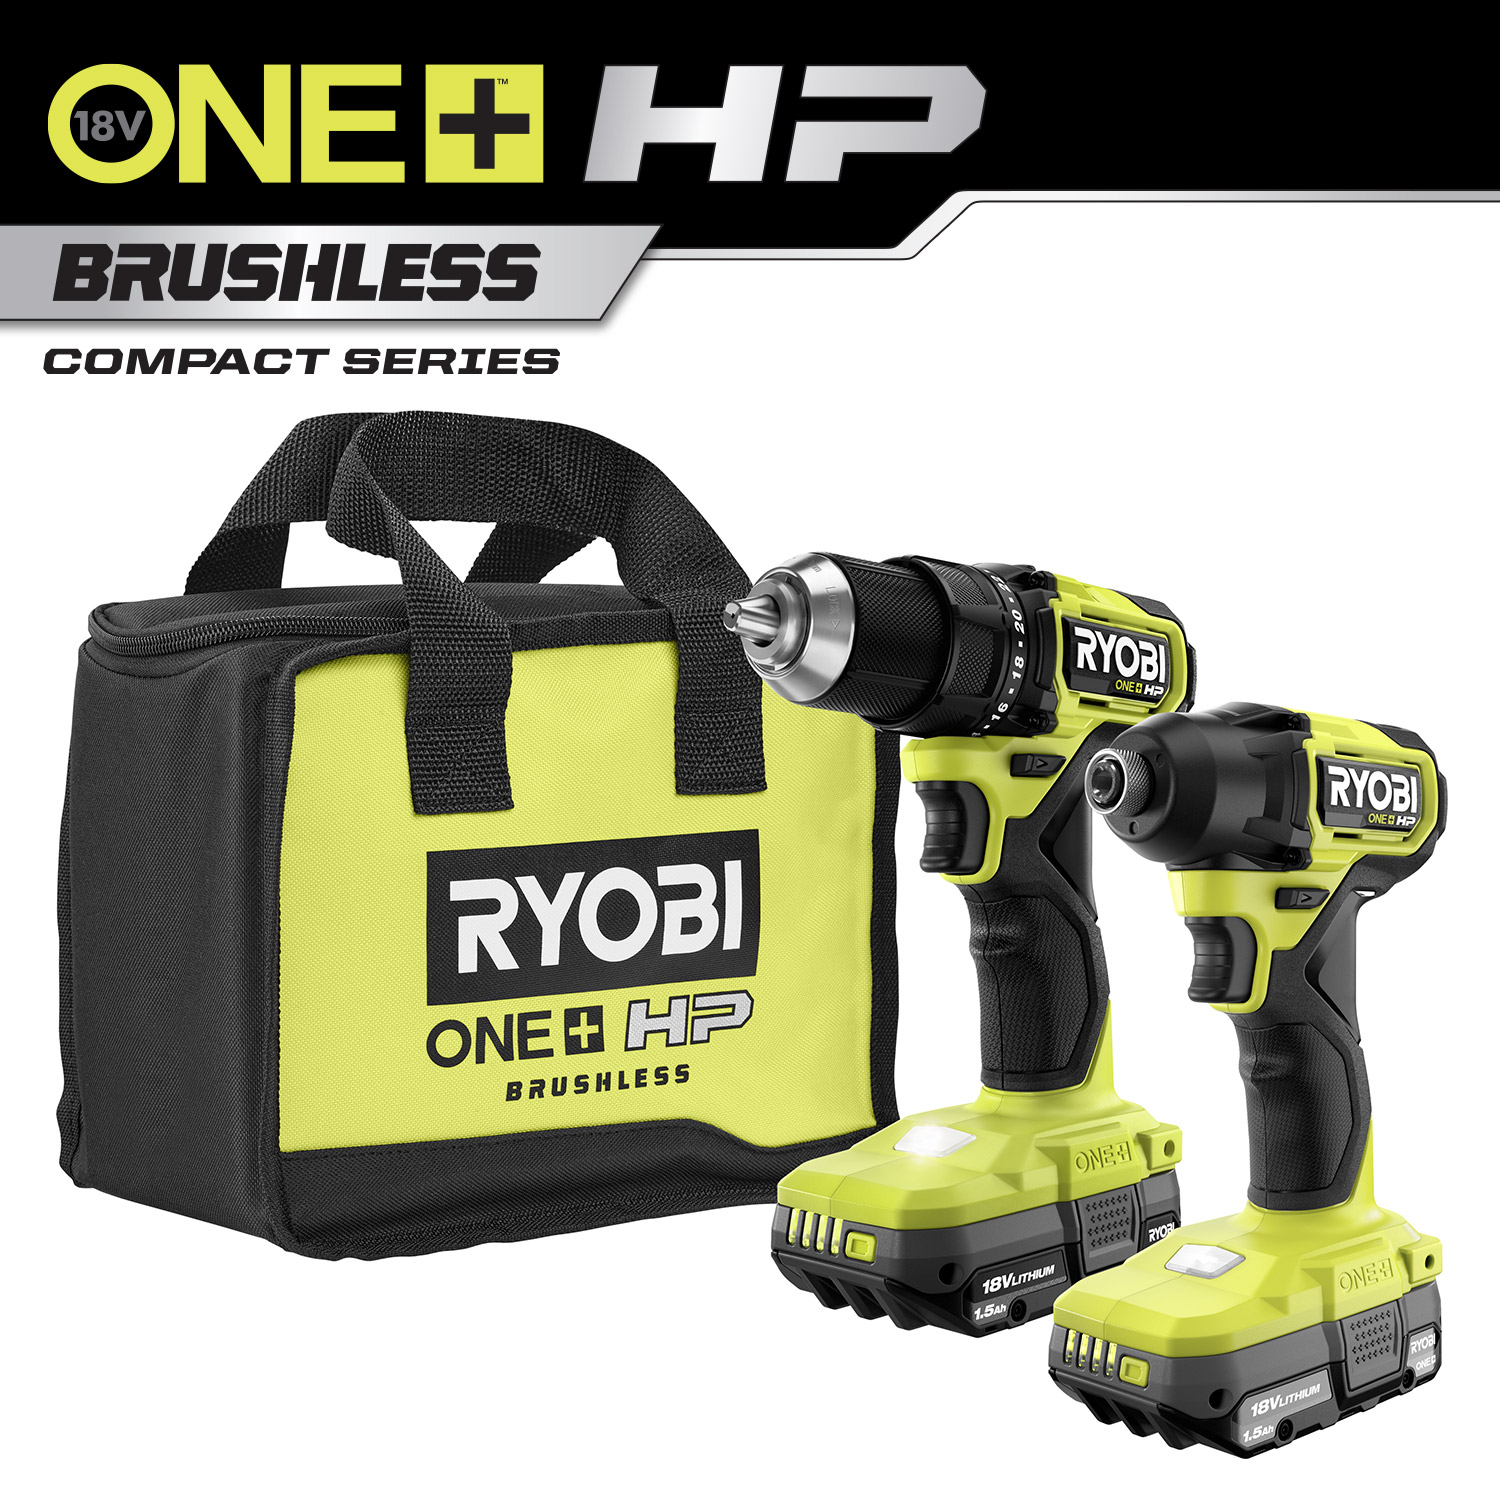 18V ONE+ HP Compact Brushless One-Handed Reciprocating Saw | RYOBI